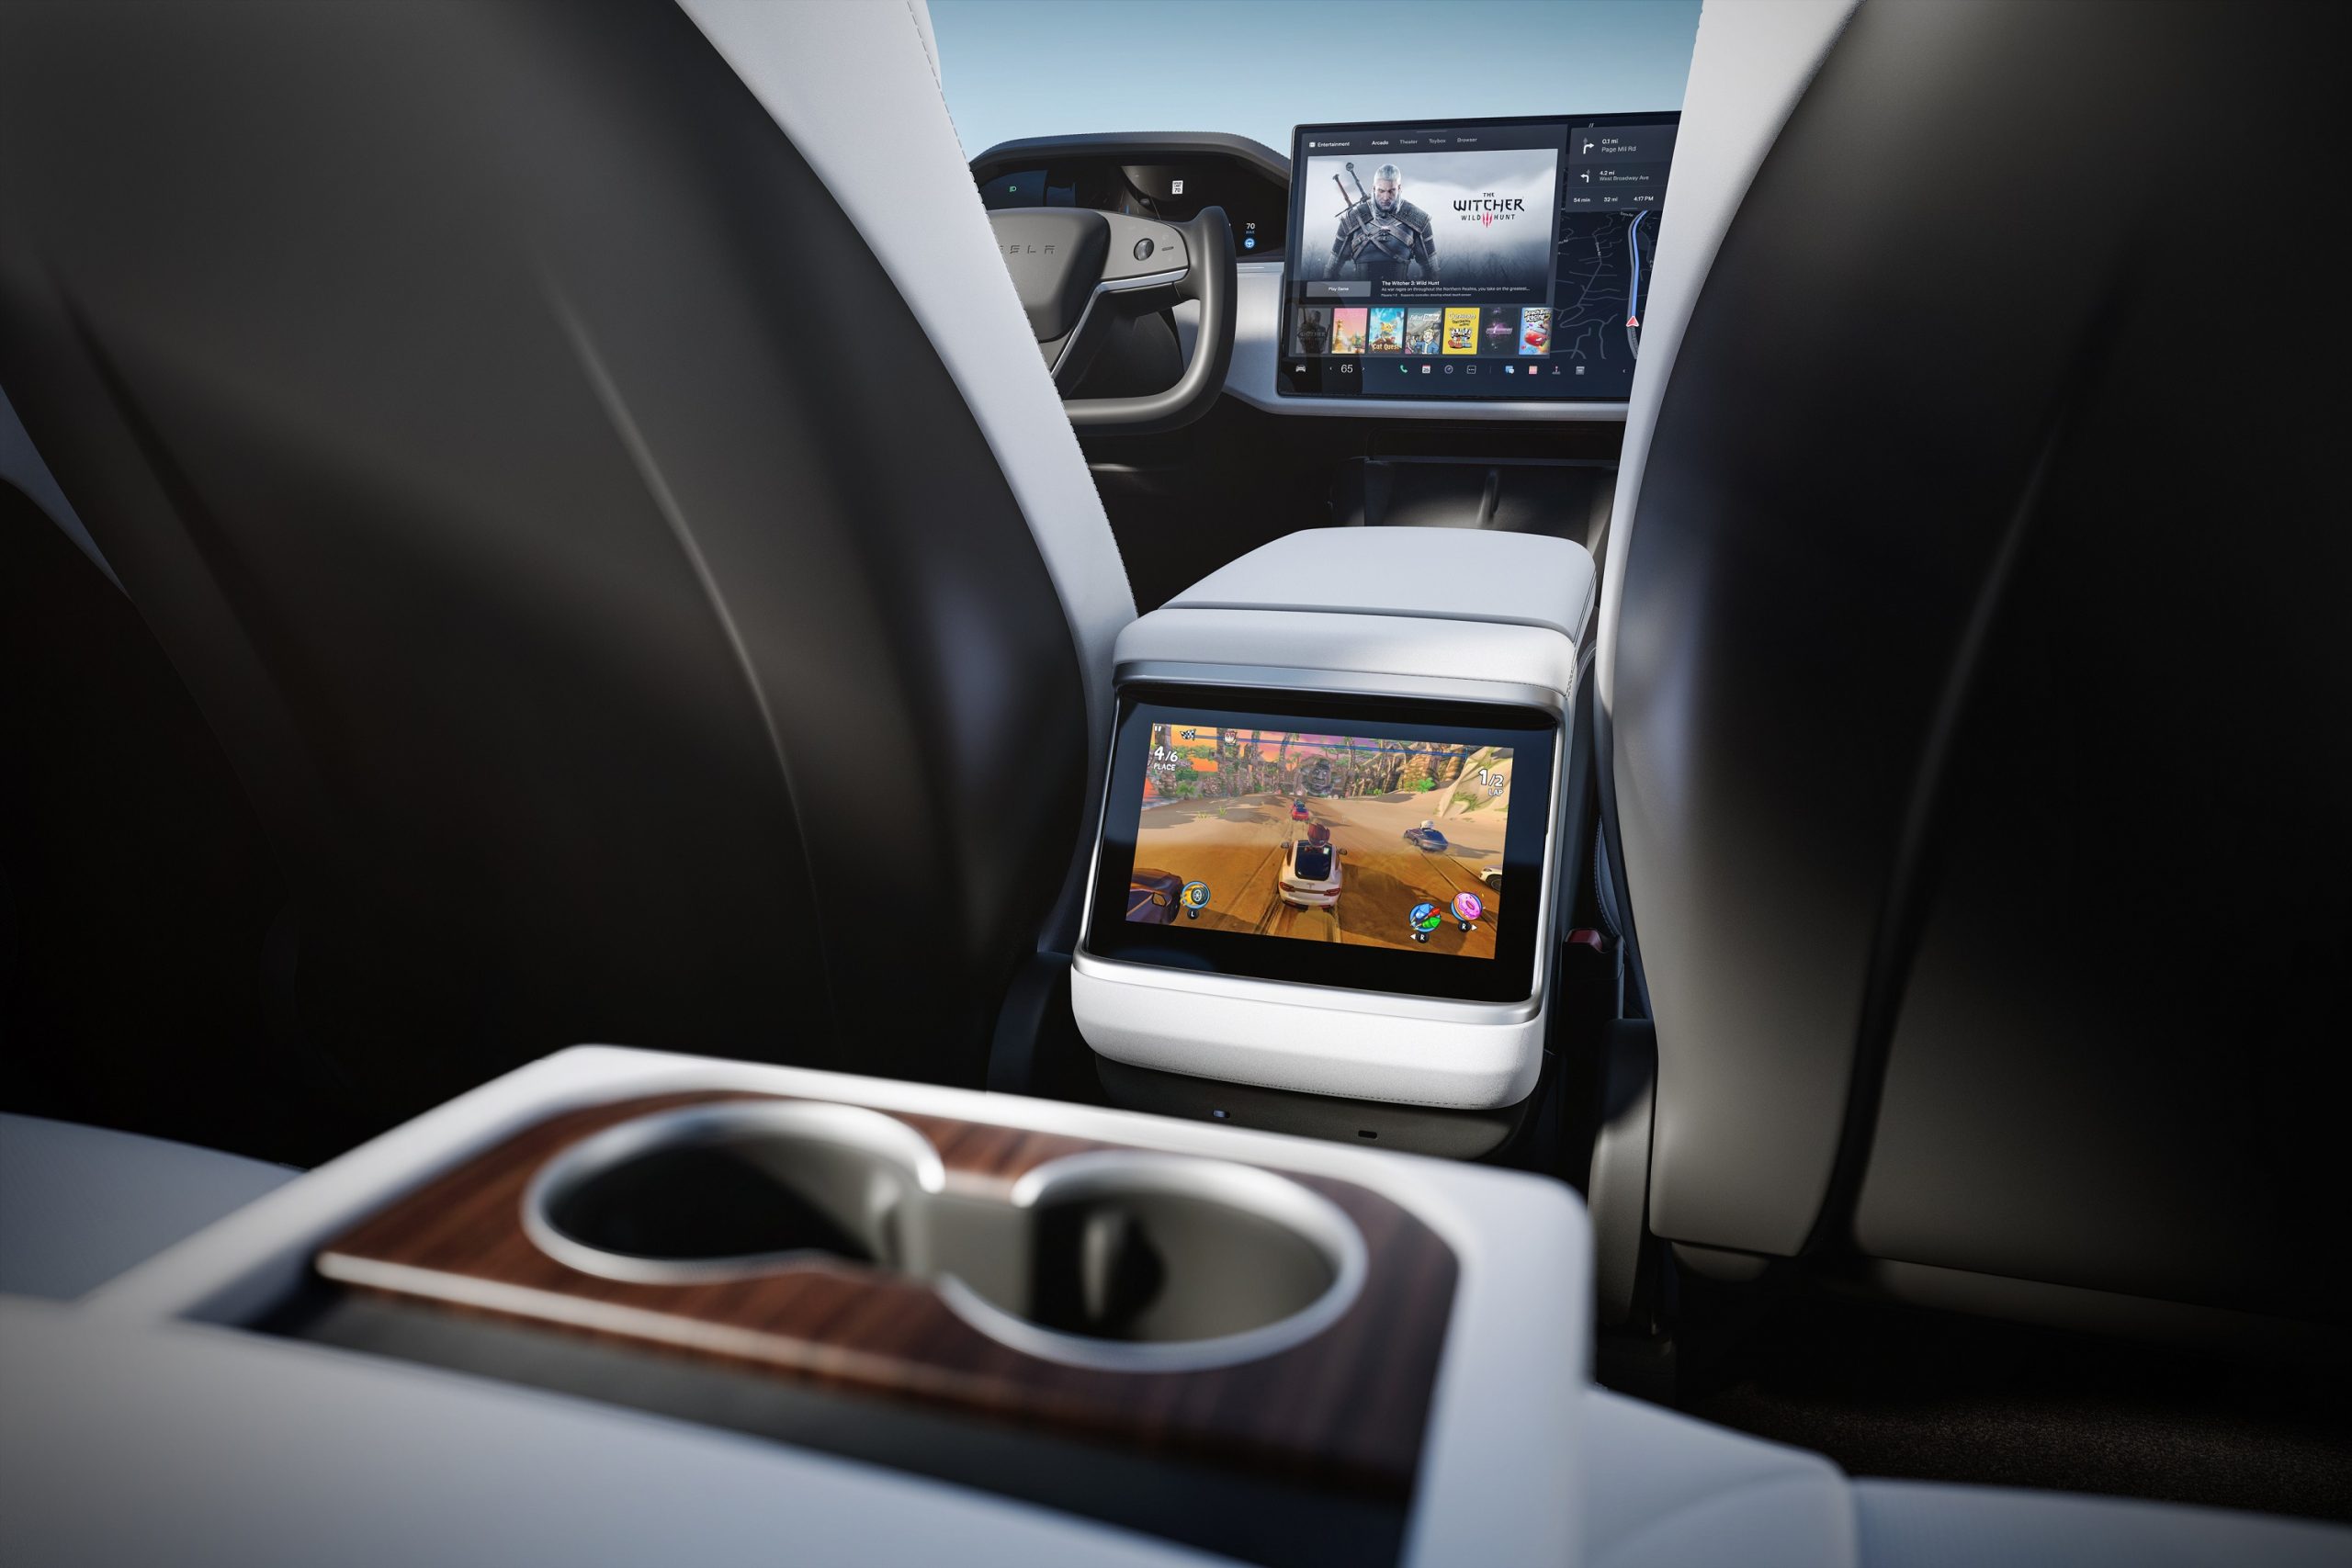 The interior of a Tesla Model S displaying video games on the rear screen